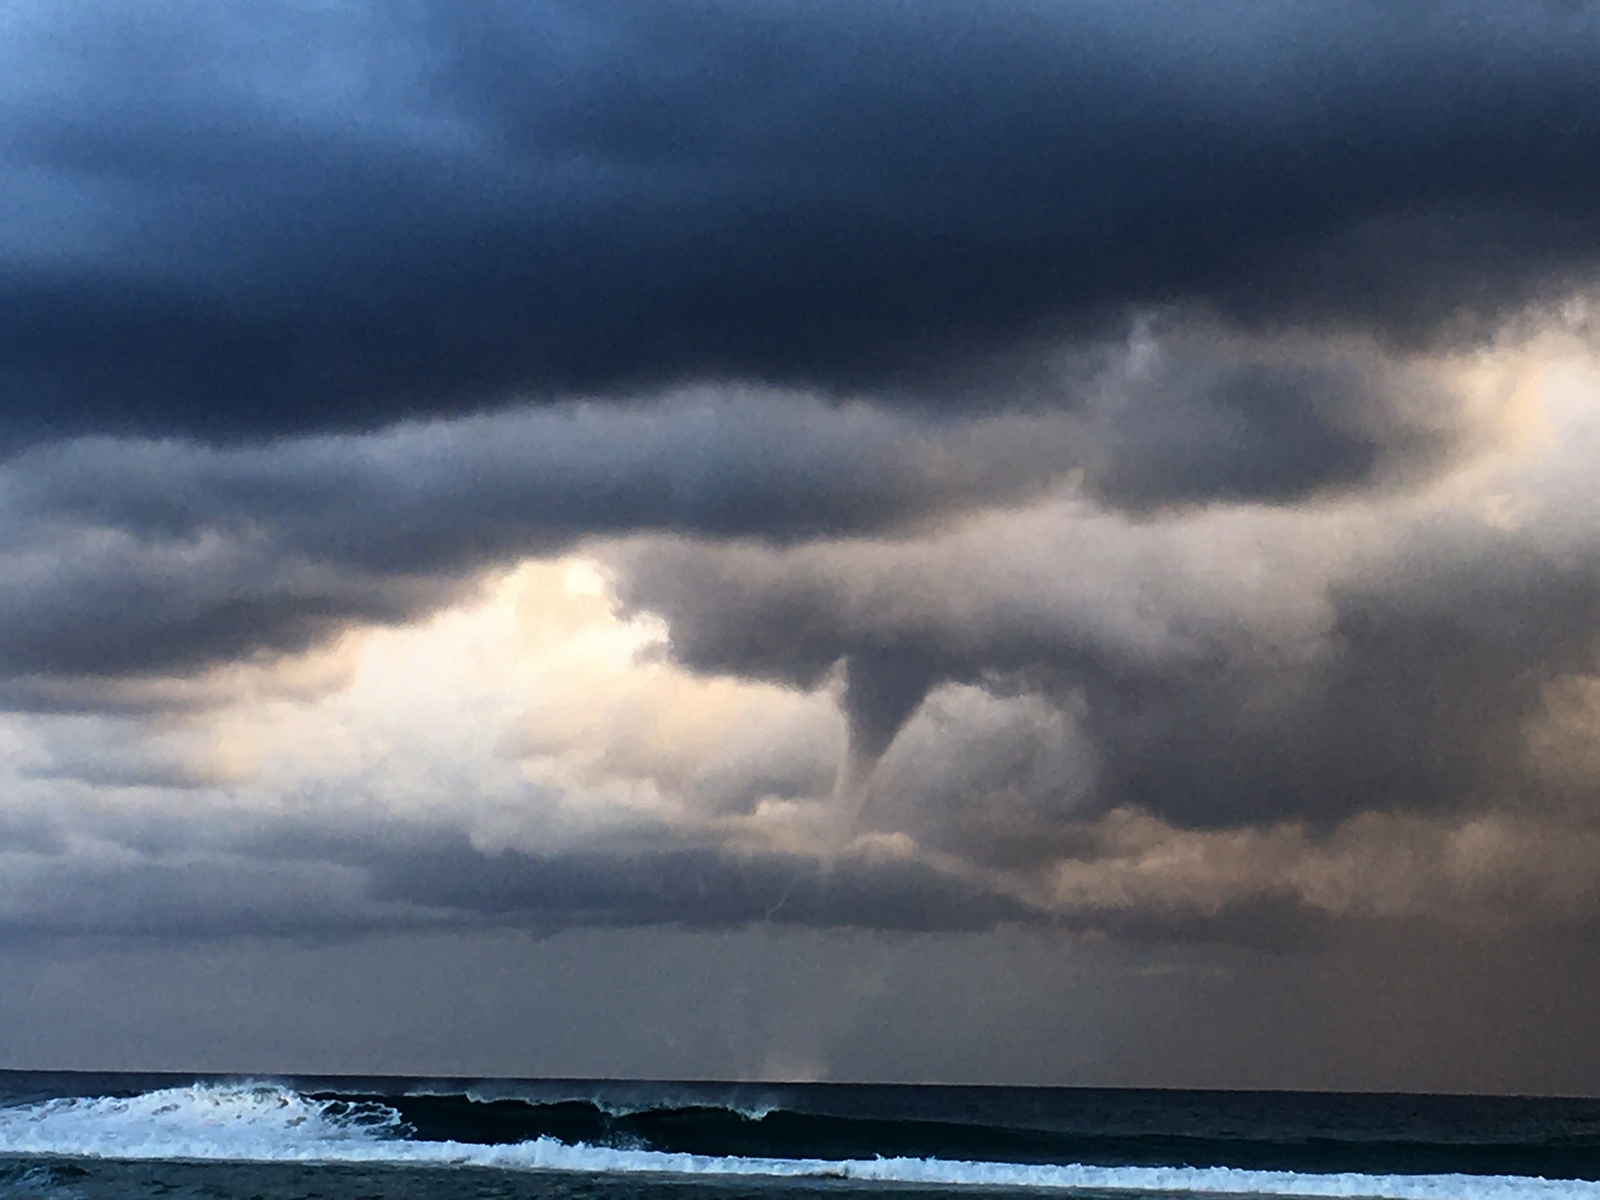 Touchdown! Ben McBurney captures this v-shaped waterspout off Cabarita Beach, Northern NSW yesterday, Thursday, 14th May, 2020.